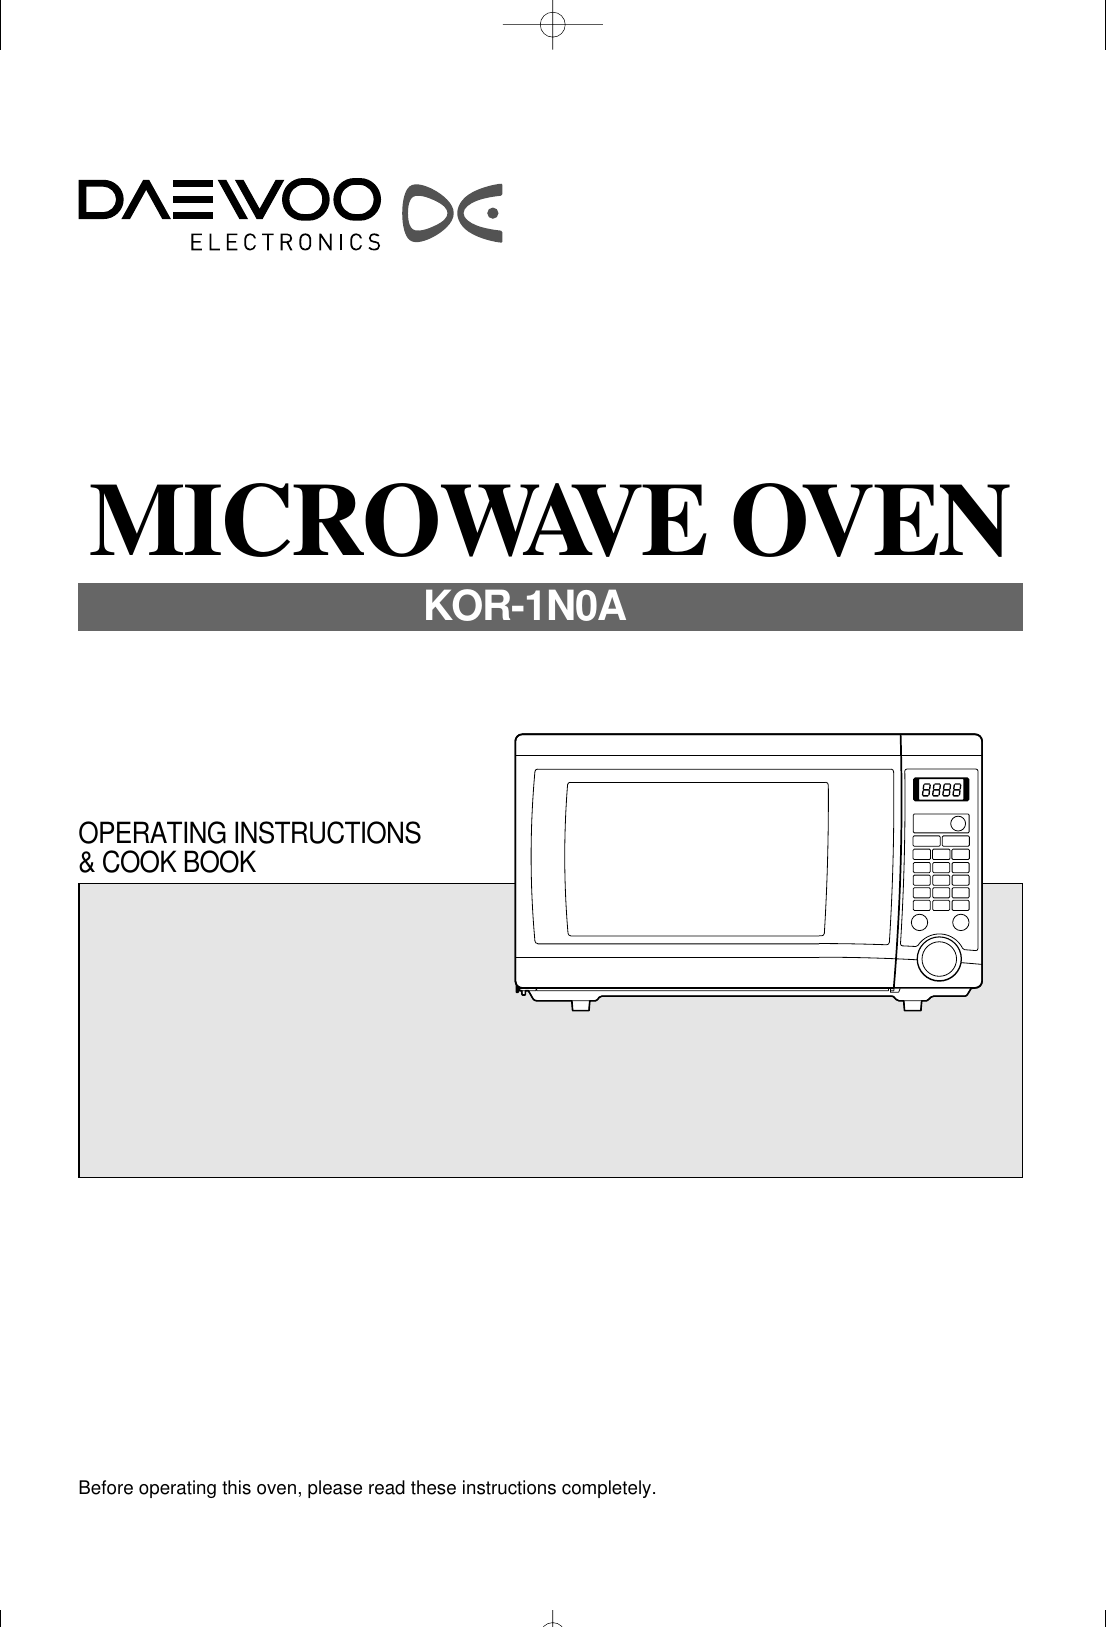 Before operating this oven, please read these instructions completely.OPERATING INSTRUCTIONS&amp; COOK BOOKMICROWAVE OVENKOR-1N0A